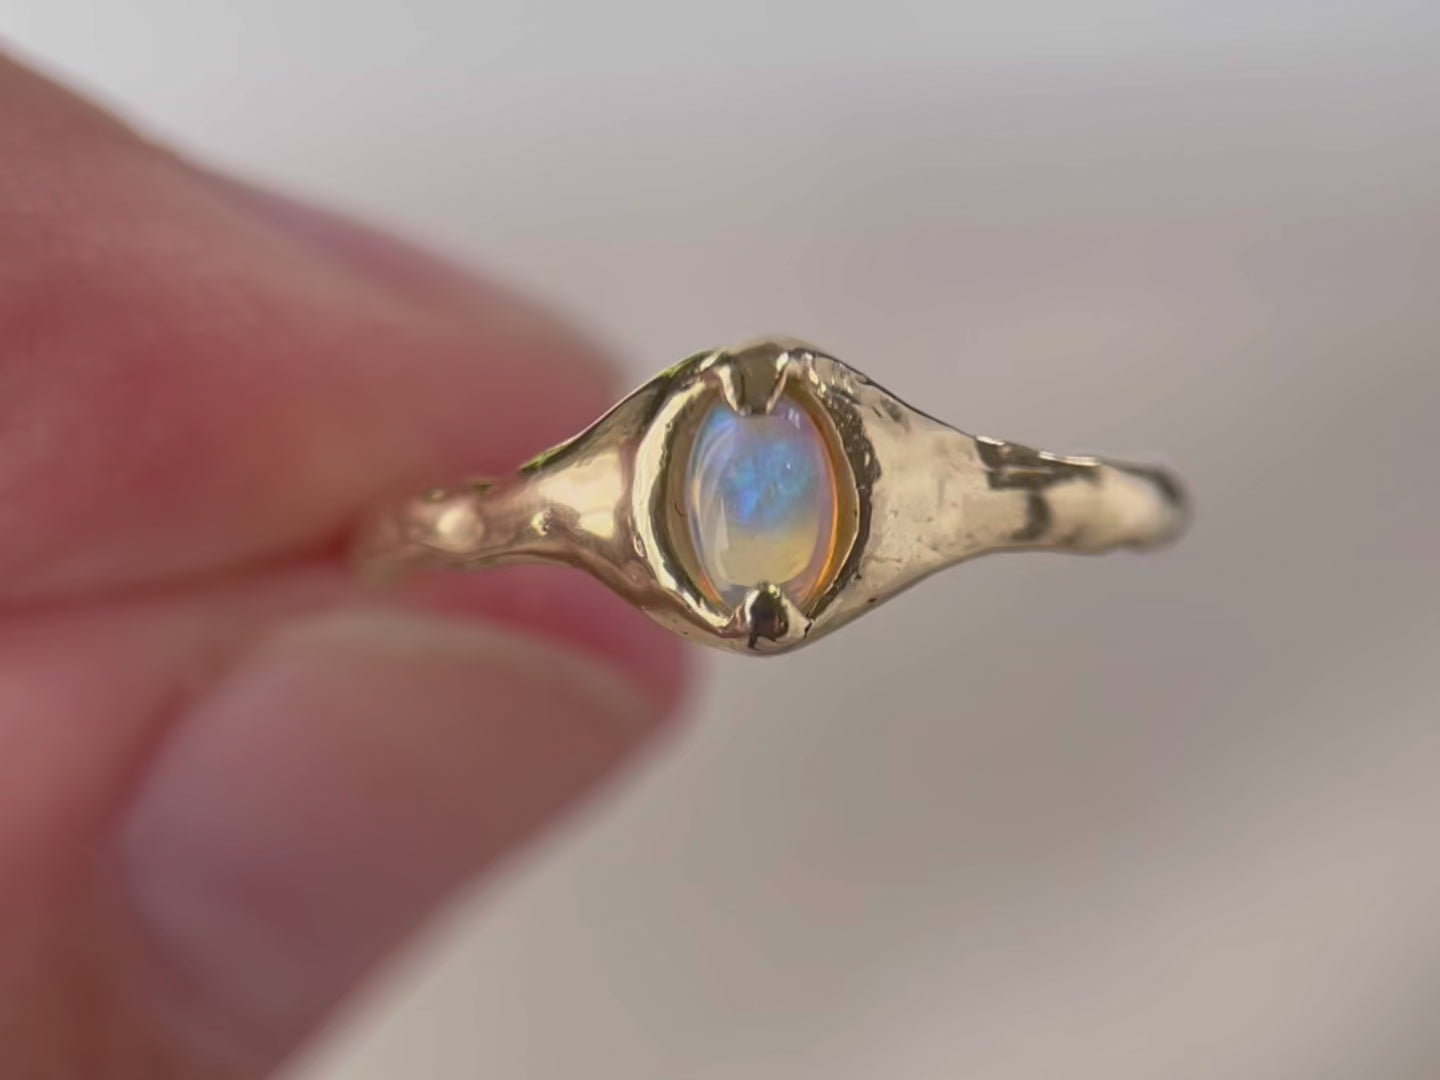 Close up video of a 14k gold opal ring.